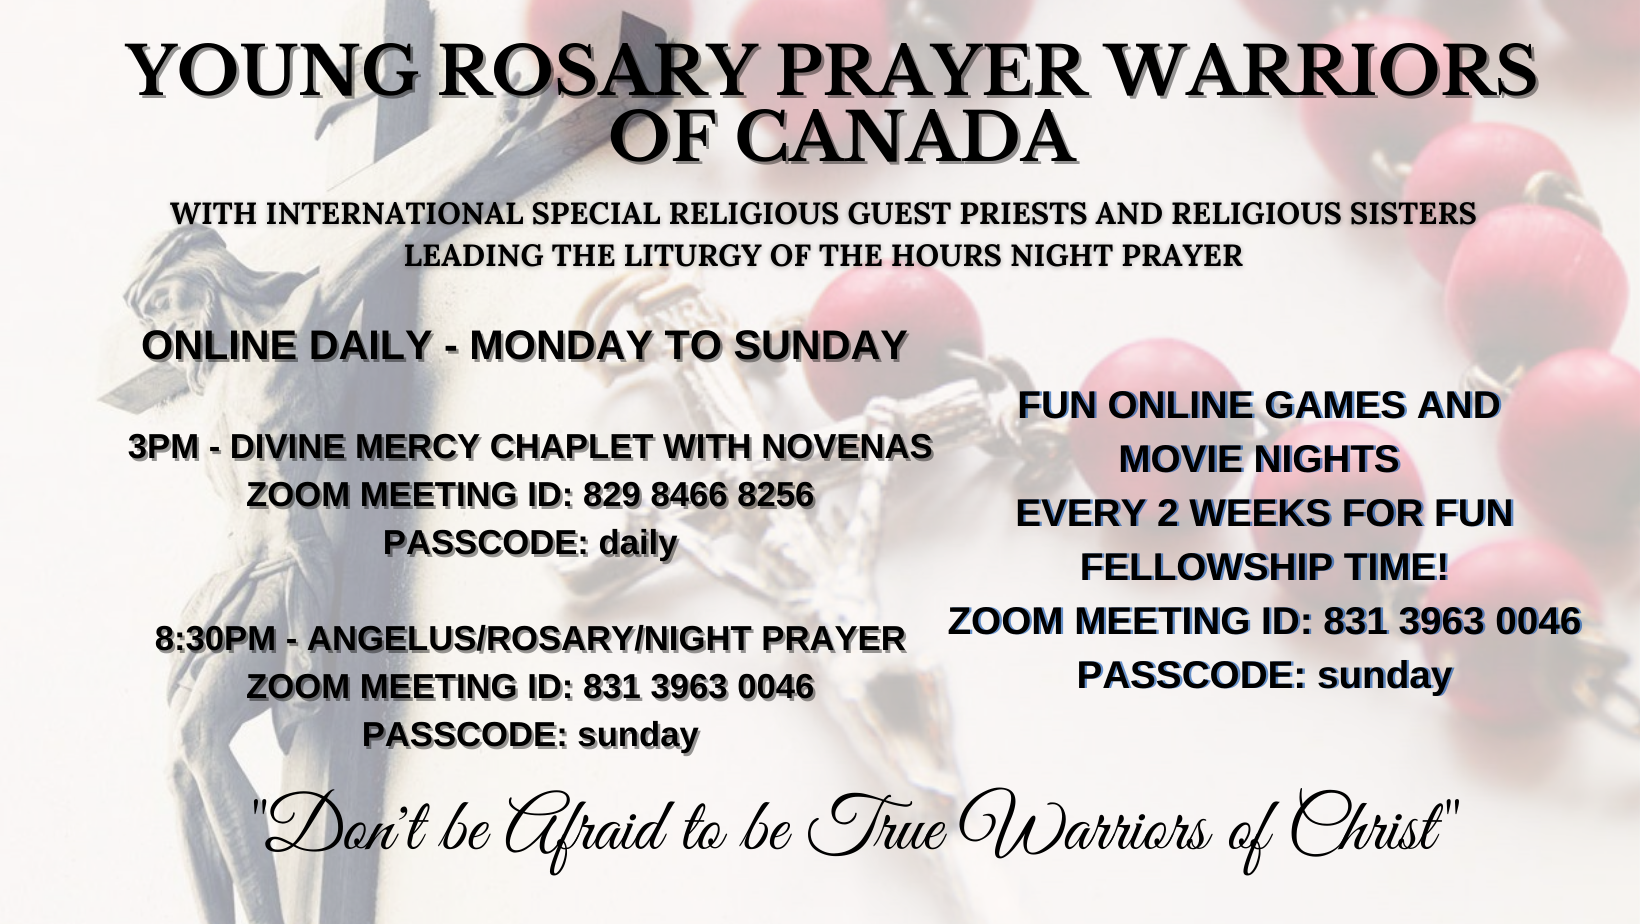 YOUNG ROSARY PRAYER WARRIORS OF CANADA POSTER